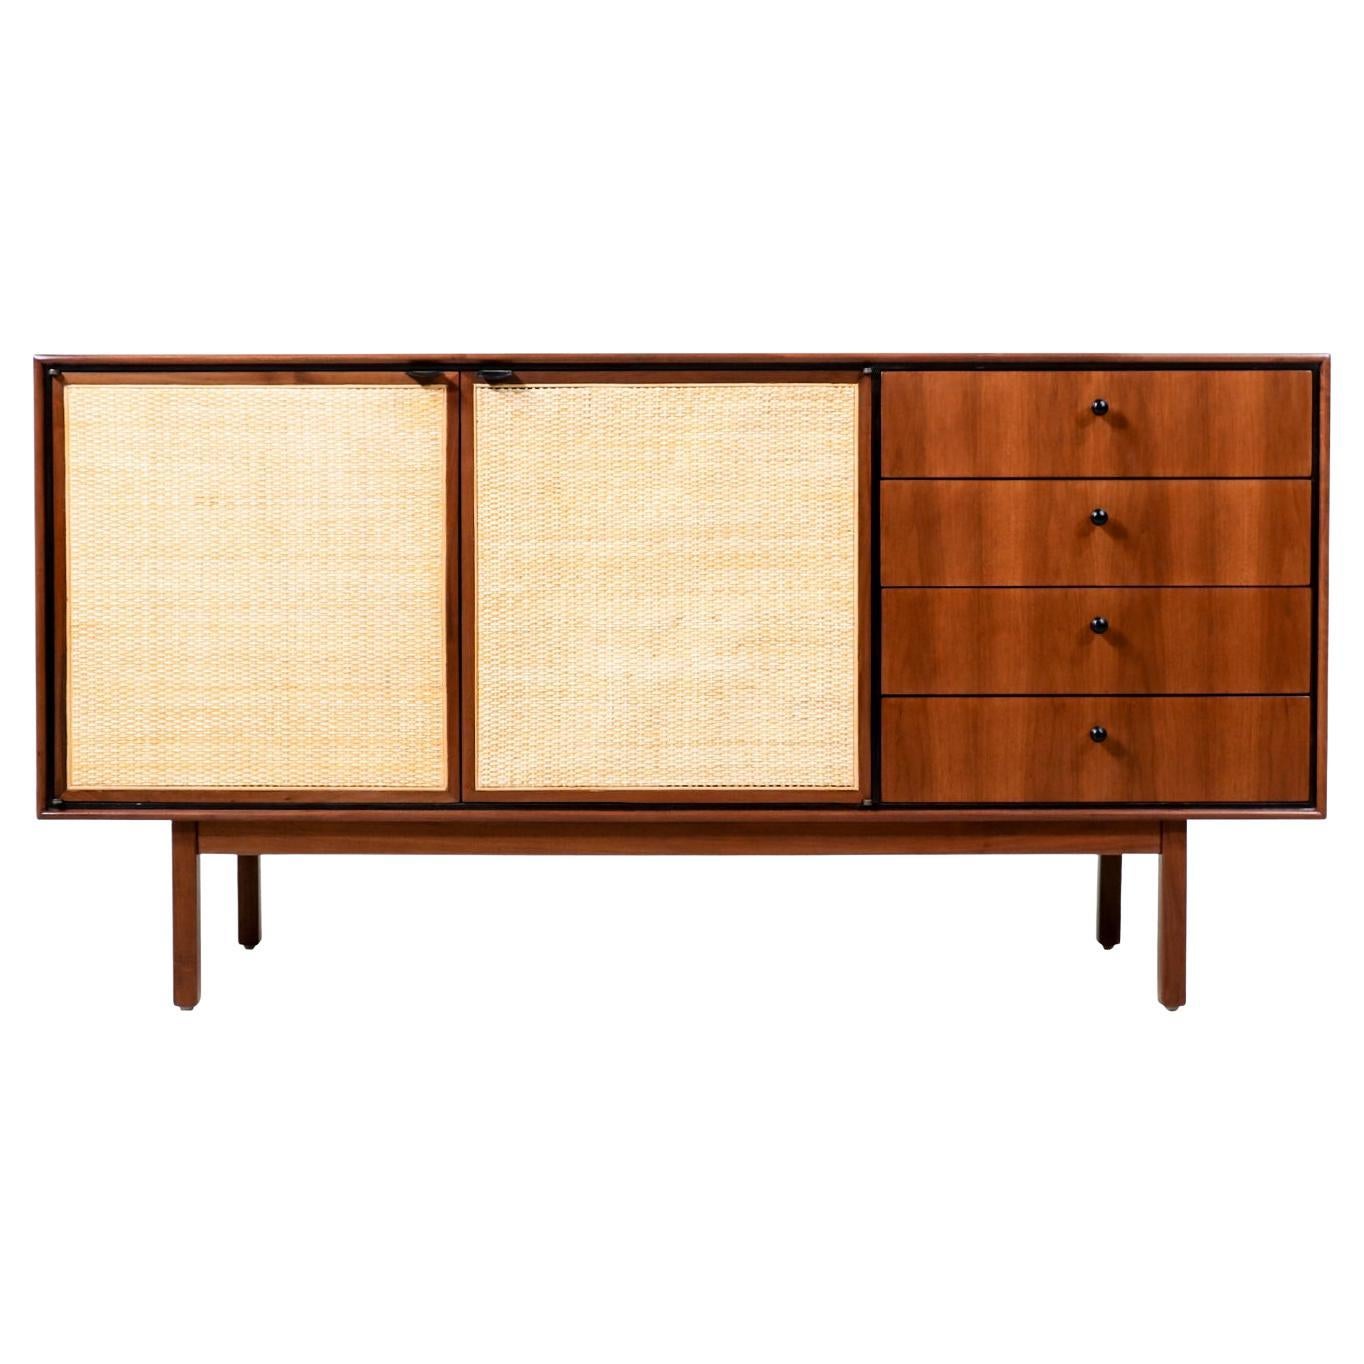 Mid-Century Modern Walnut & Cane Credenza by Jack Cartwright for Founders